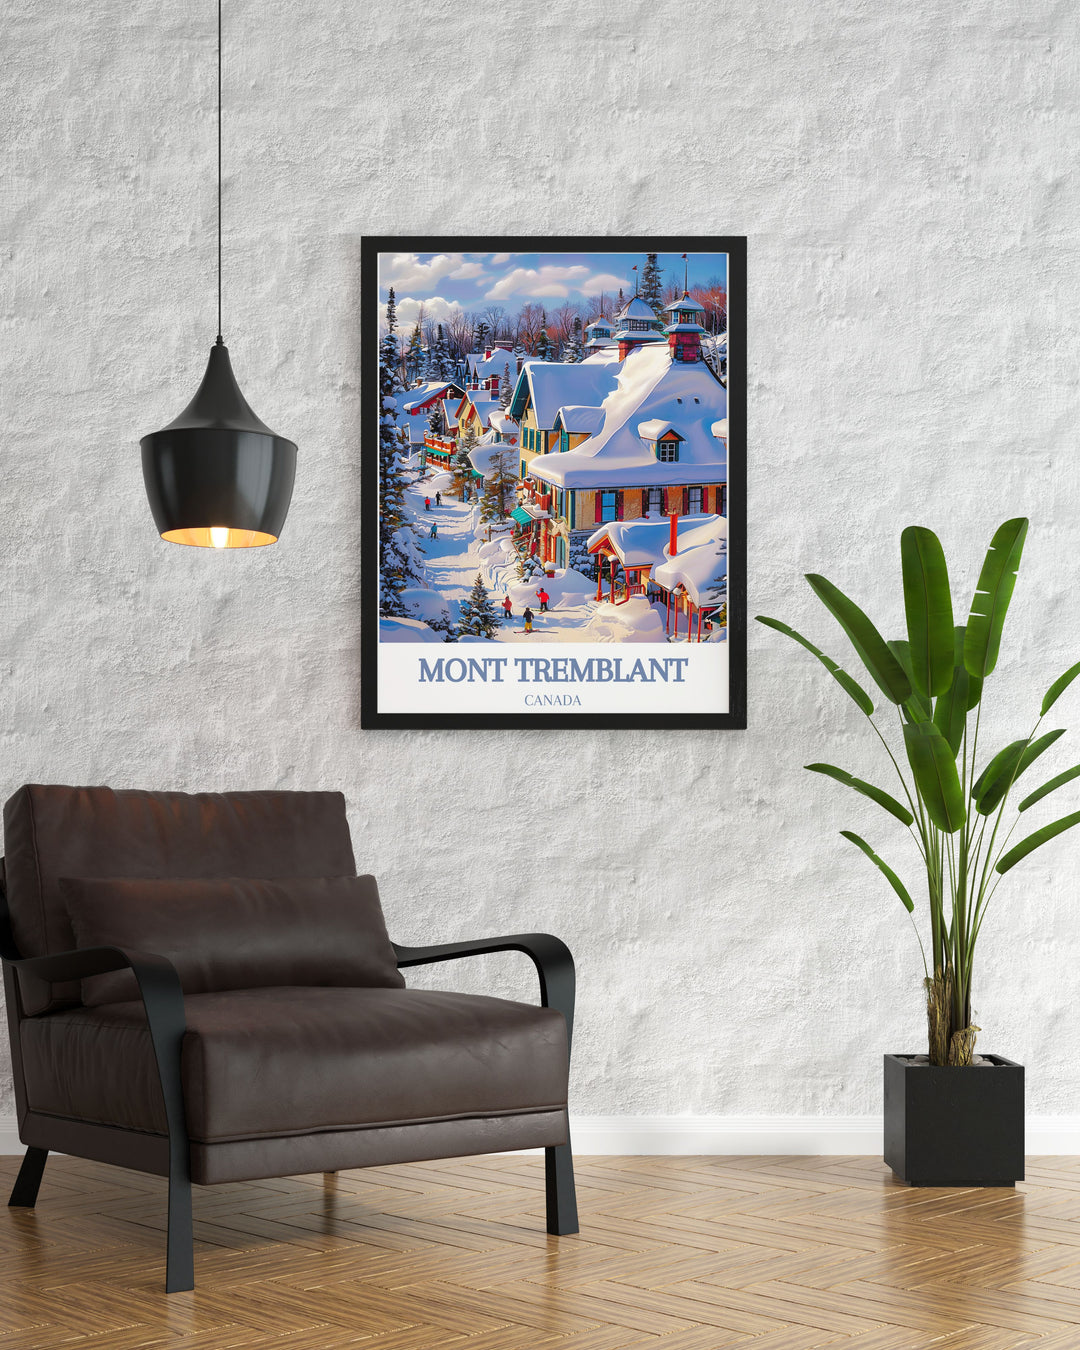 Vintage Ski Poster of Tremblant Ski Resort highlighting the majestic peaks and serene snow covered slopes of Mont Tremblant an ideal addition to any ski enthusiasts collection or as a captivating piece of wall art for nature lovers and adventure seekers